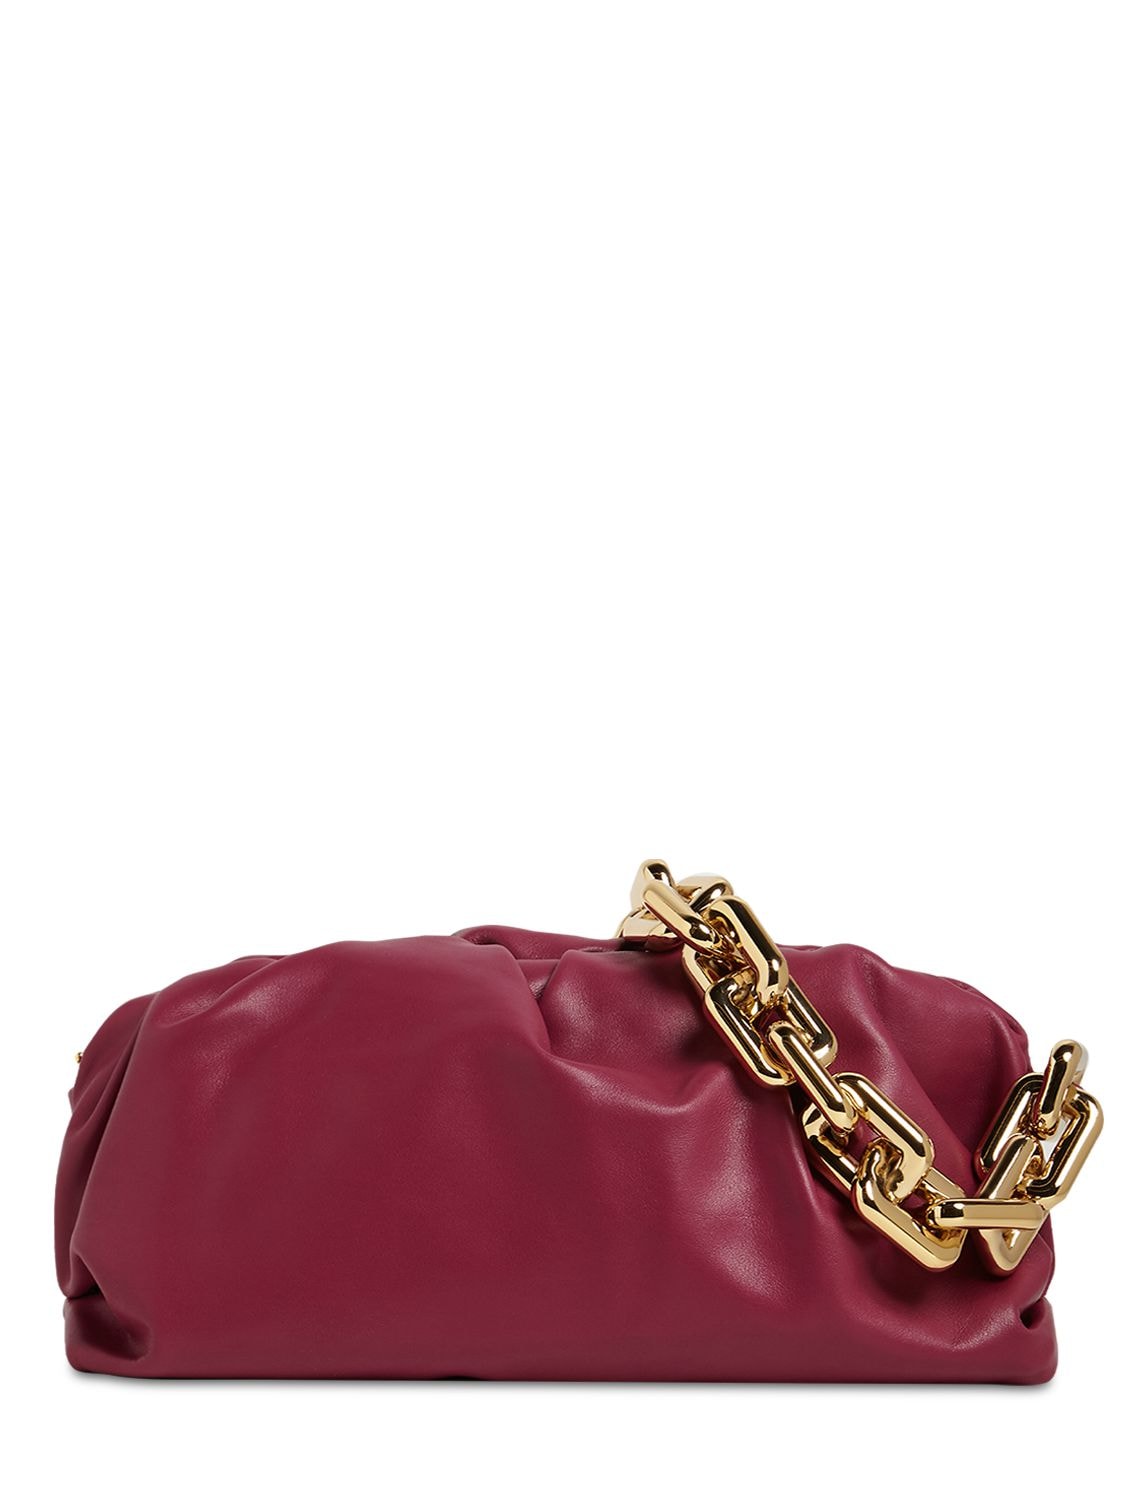 The Chain Pouch Leather Shoulder Bag In Burgundy/gold